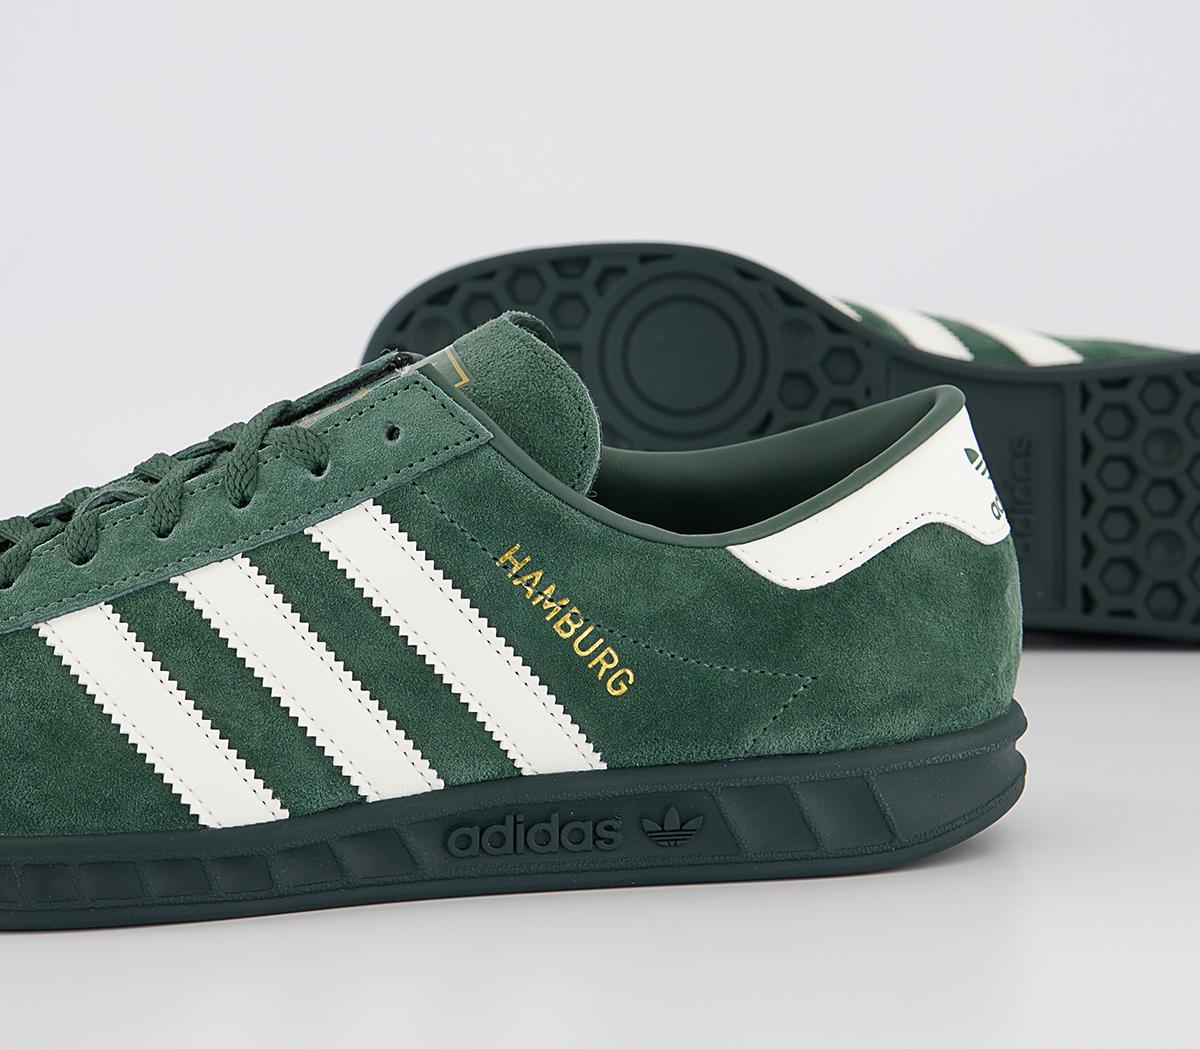 adidas Hamburg Trainers Green Oxide Off White Shadow Green - Men's Trainers